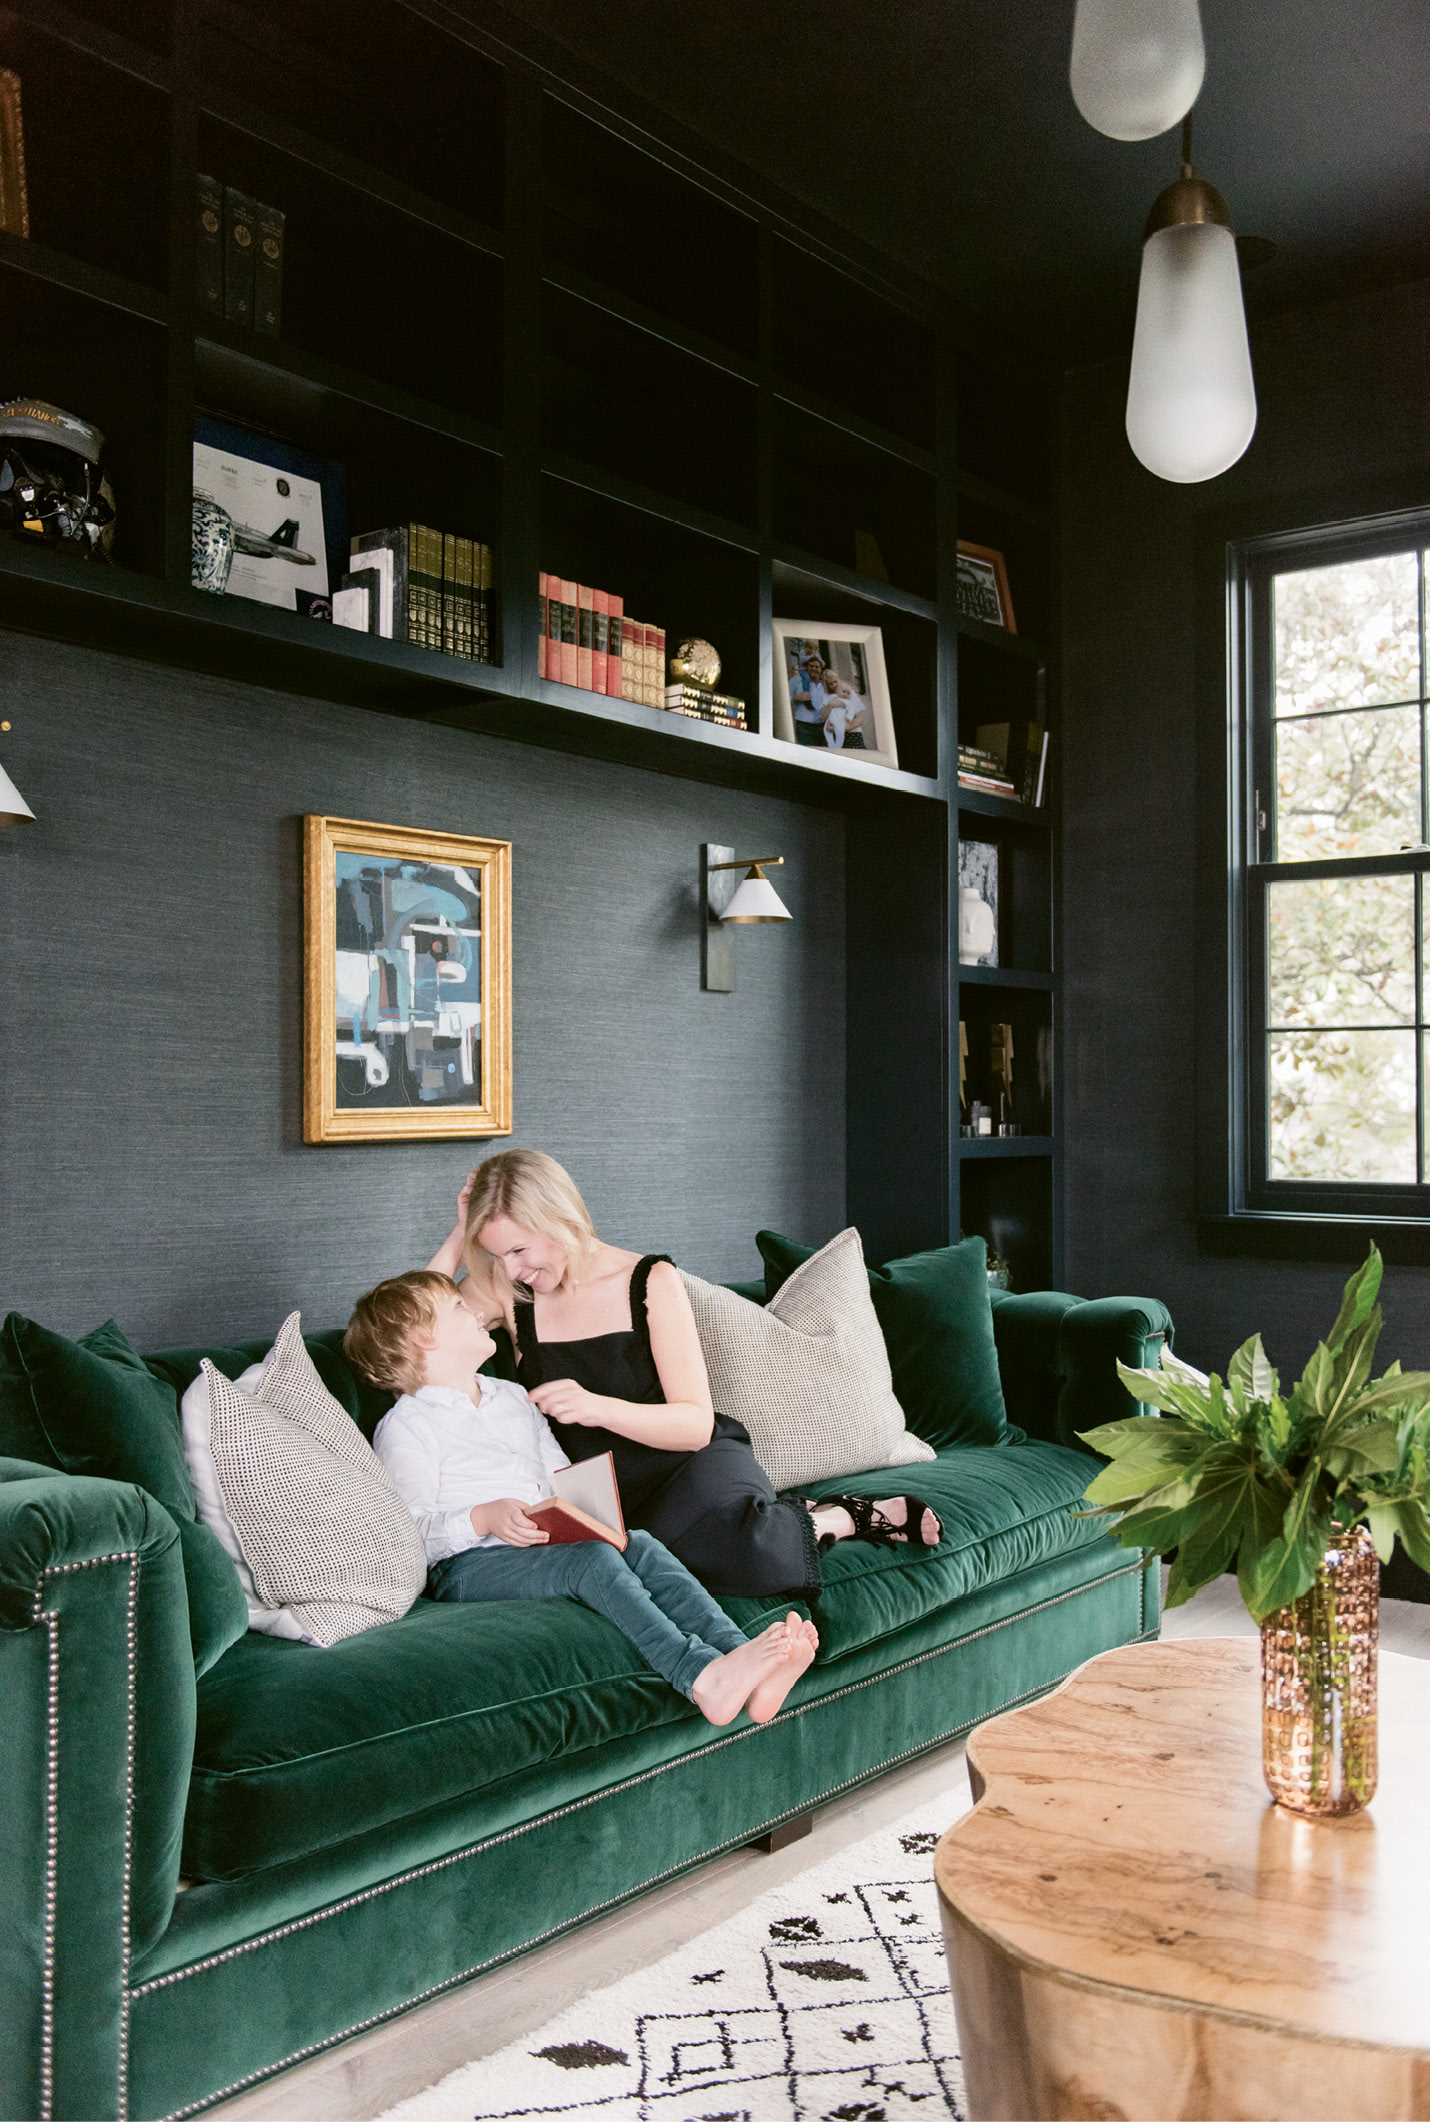 Molly and Sawyer read in the library, where the Phillip Jeffries “Manila Hemp” wallpaper in “charcoal” and Hickory Chair sofa upholstered in emerald-green velvet by Ralph Lauren set a moody, masculine tone.